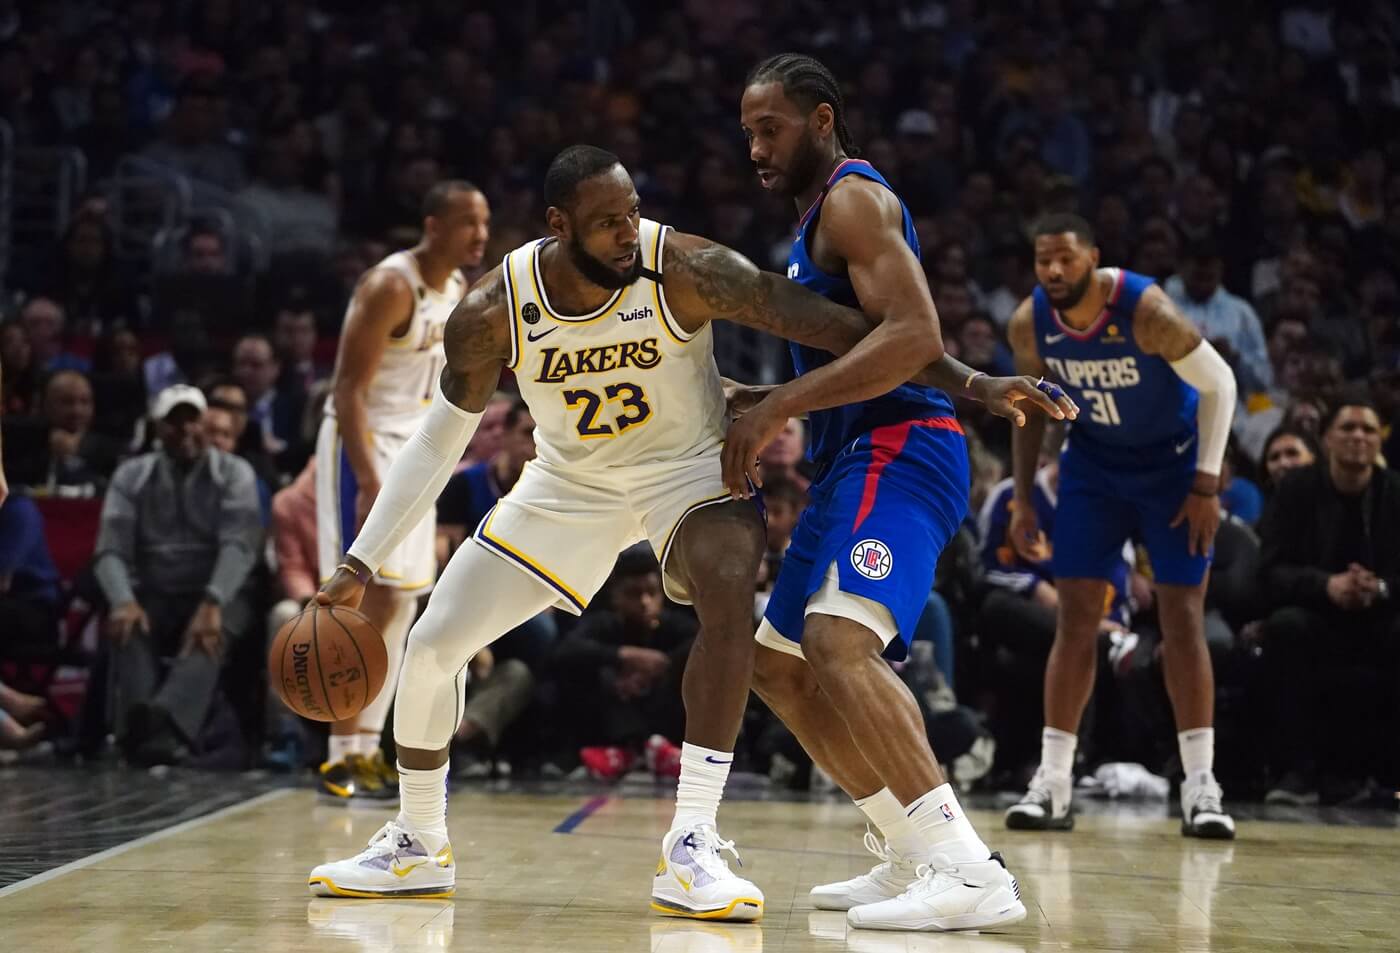 Mar 8, 2020; Los Angeles, California, USA; Los Angeles Lakers forward LeBron James (23) is defended by LA Clippers forward Kawhi Leonard (2) in the second half at Staples Center. The Lakers defeated the Clippers 112-100. Mandatory Credit: Kirby Lee-USA TODAY Sports